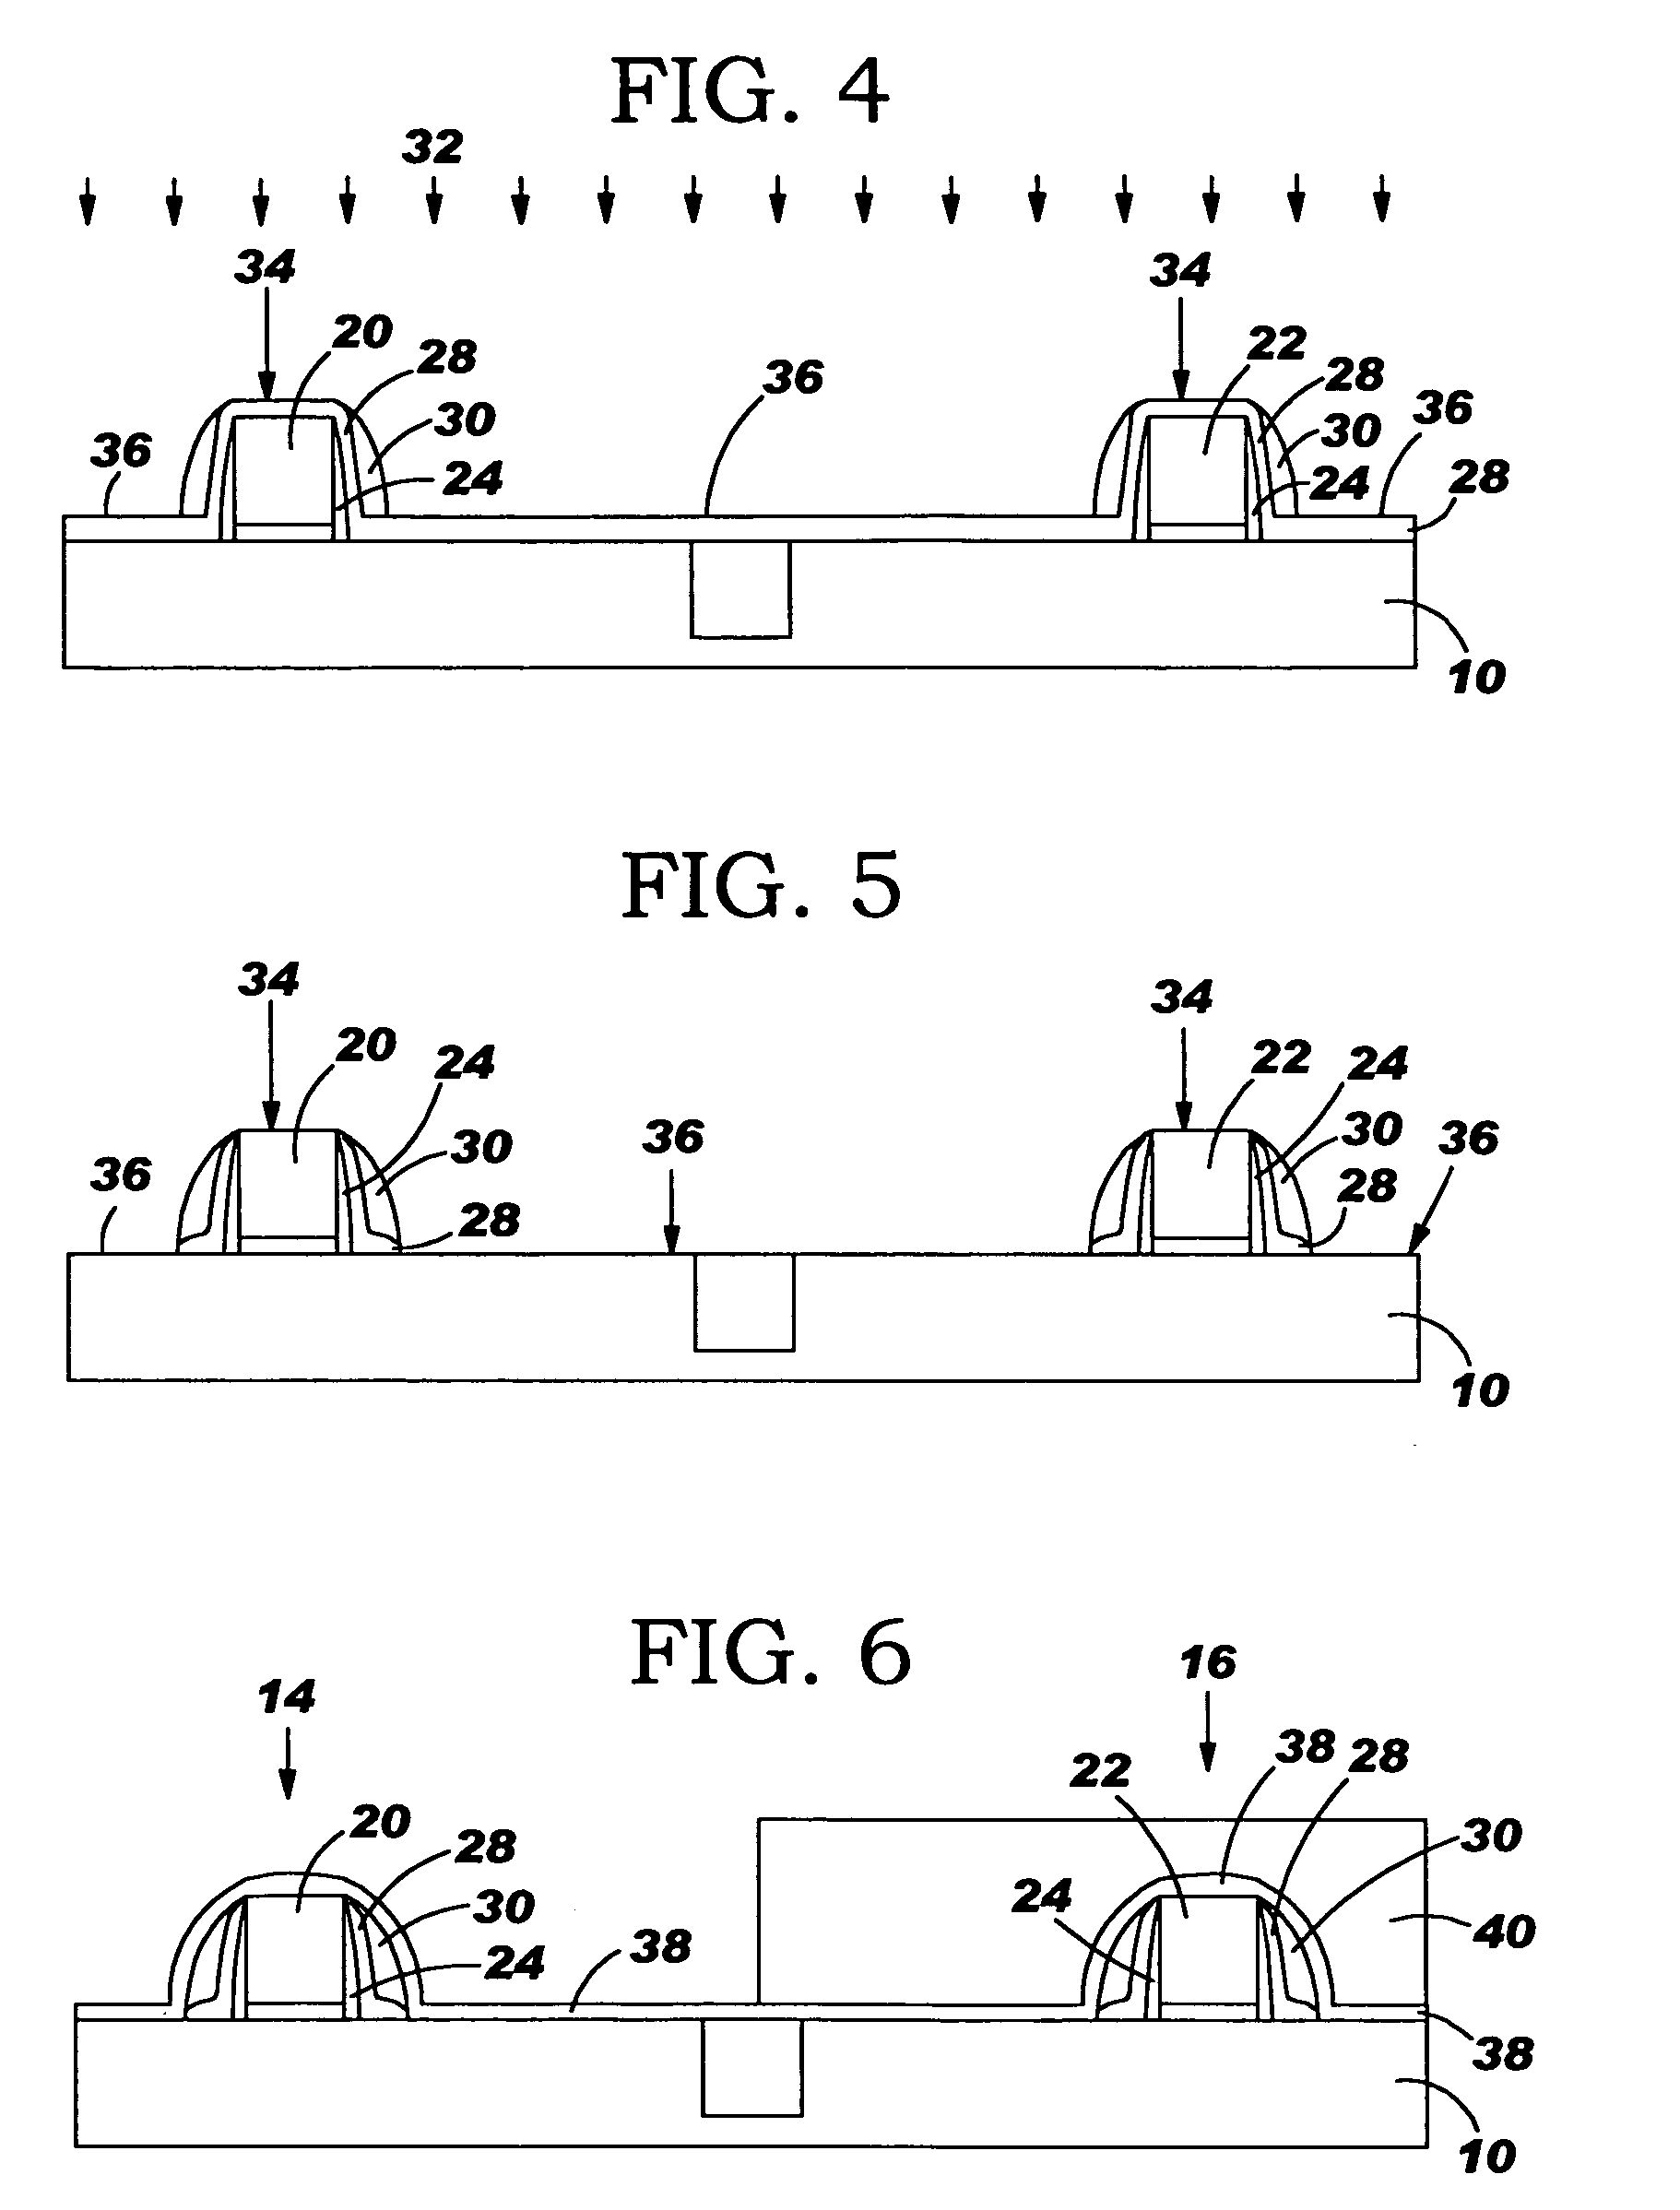 Method and structure to use an etch resistant liner on transistor gate structure to achieve high device performance